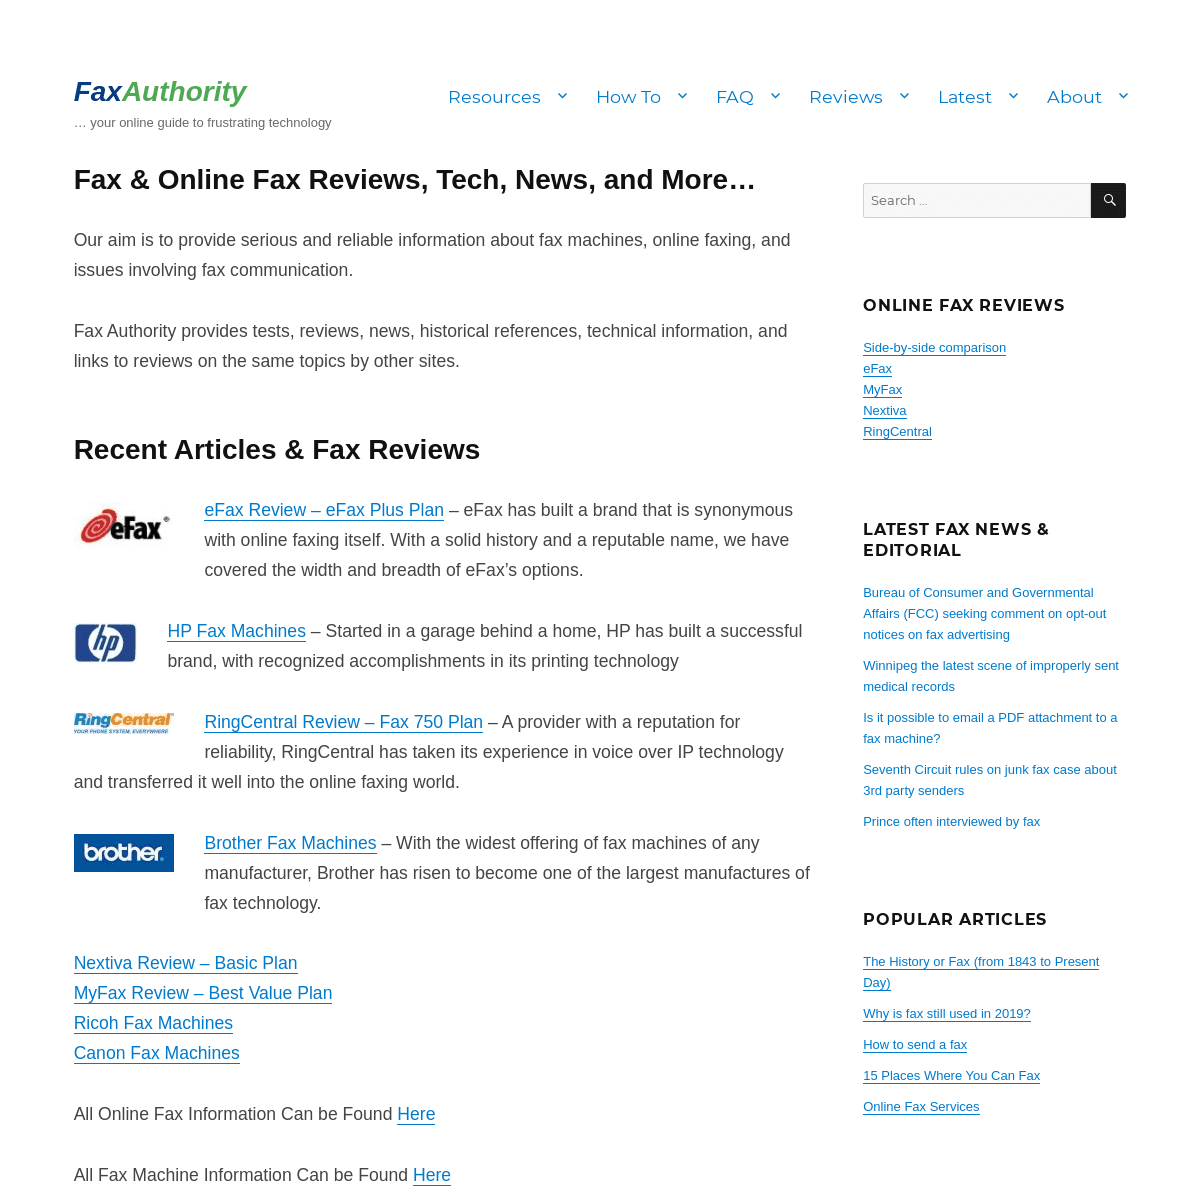 A complete backup of faxauthority.com